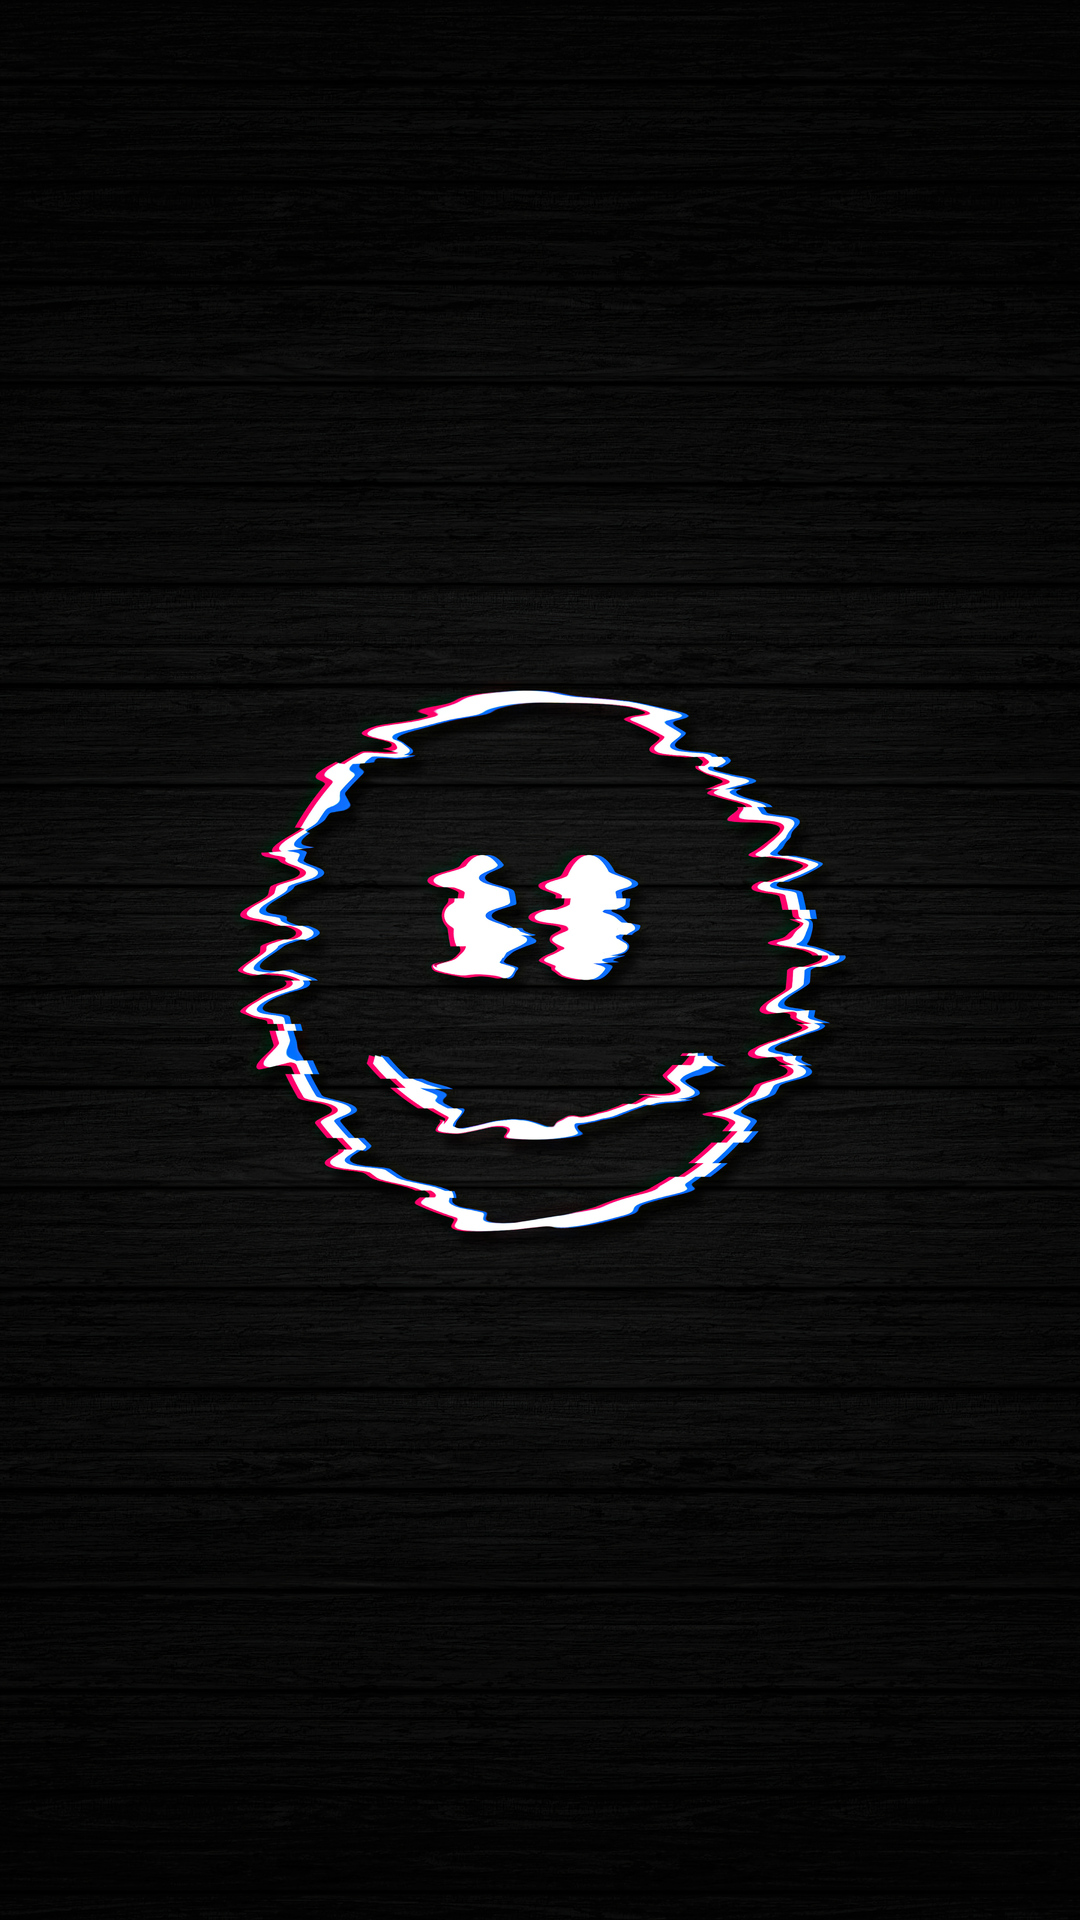 Smiley Glitch Dark Black 4k iPhone 6s, 6 Plus, Pixel xl , One Plus 3t, 5 HD 4k Wallpaper, Image, Background, Photo and Picture